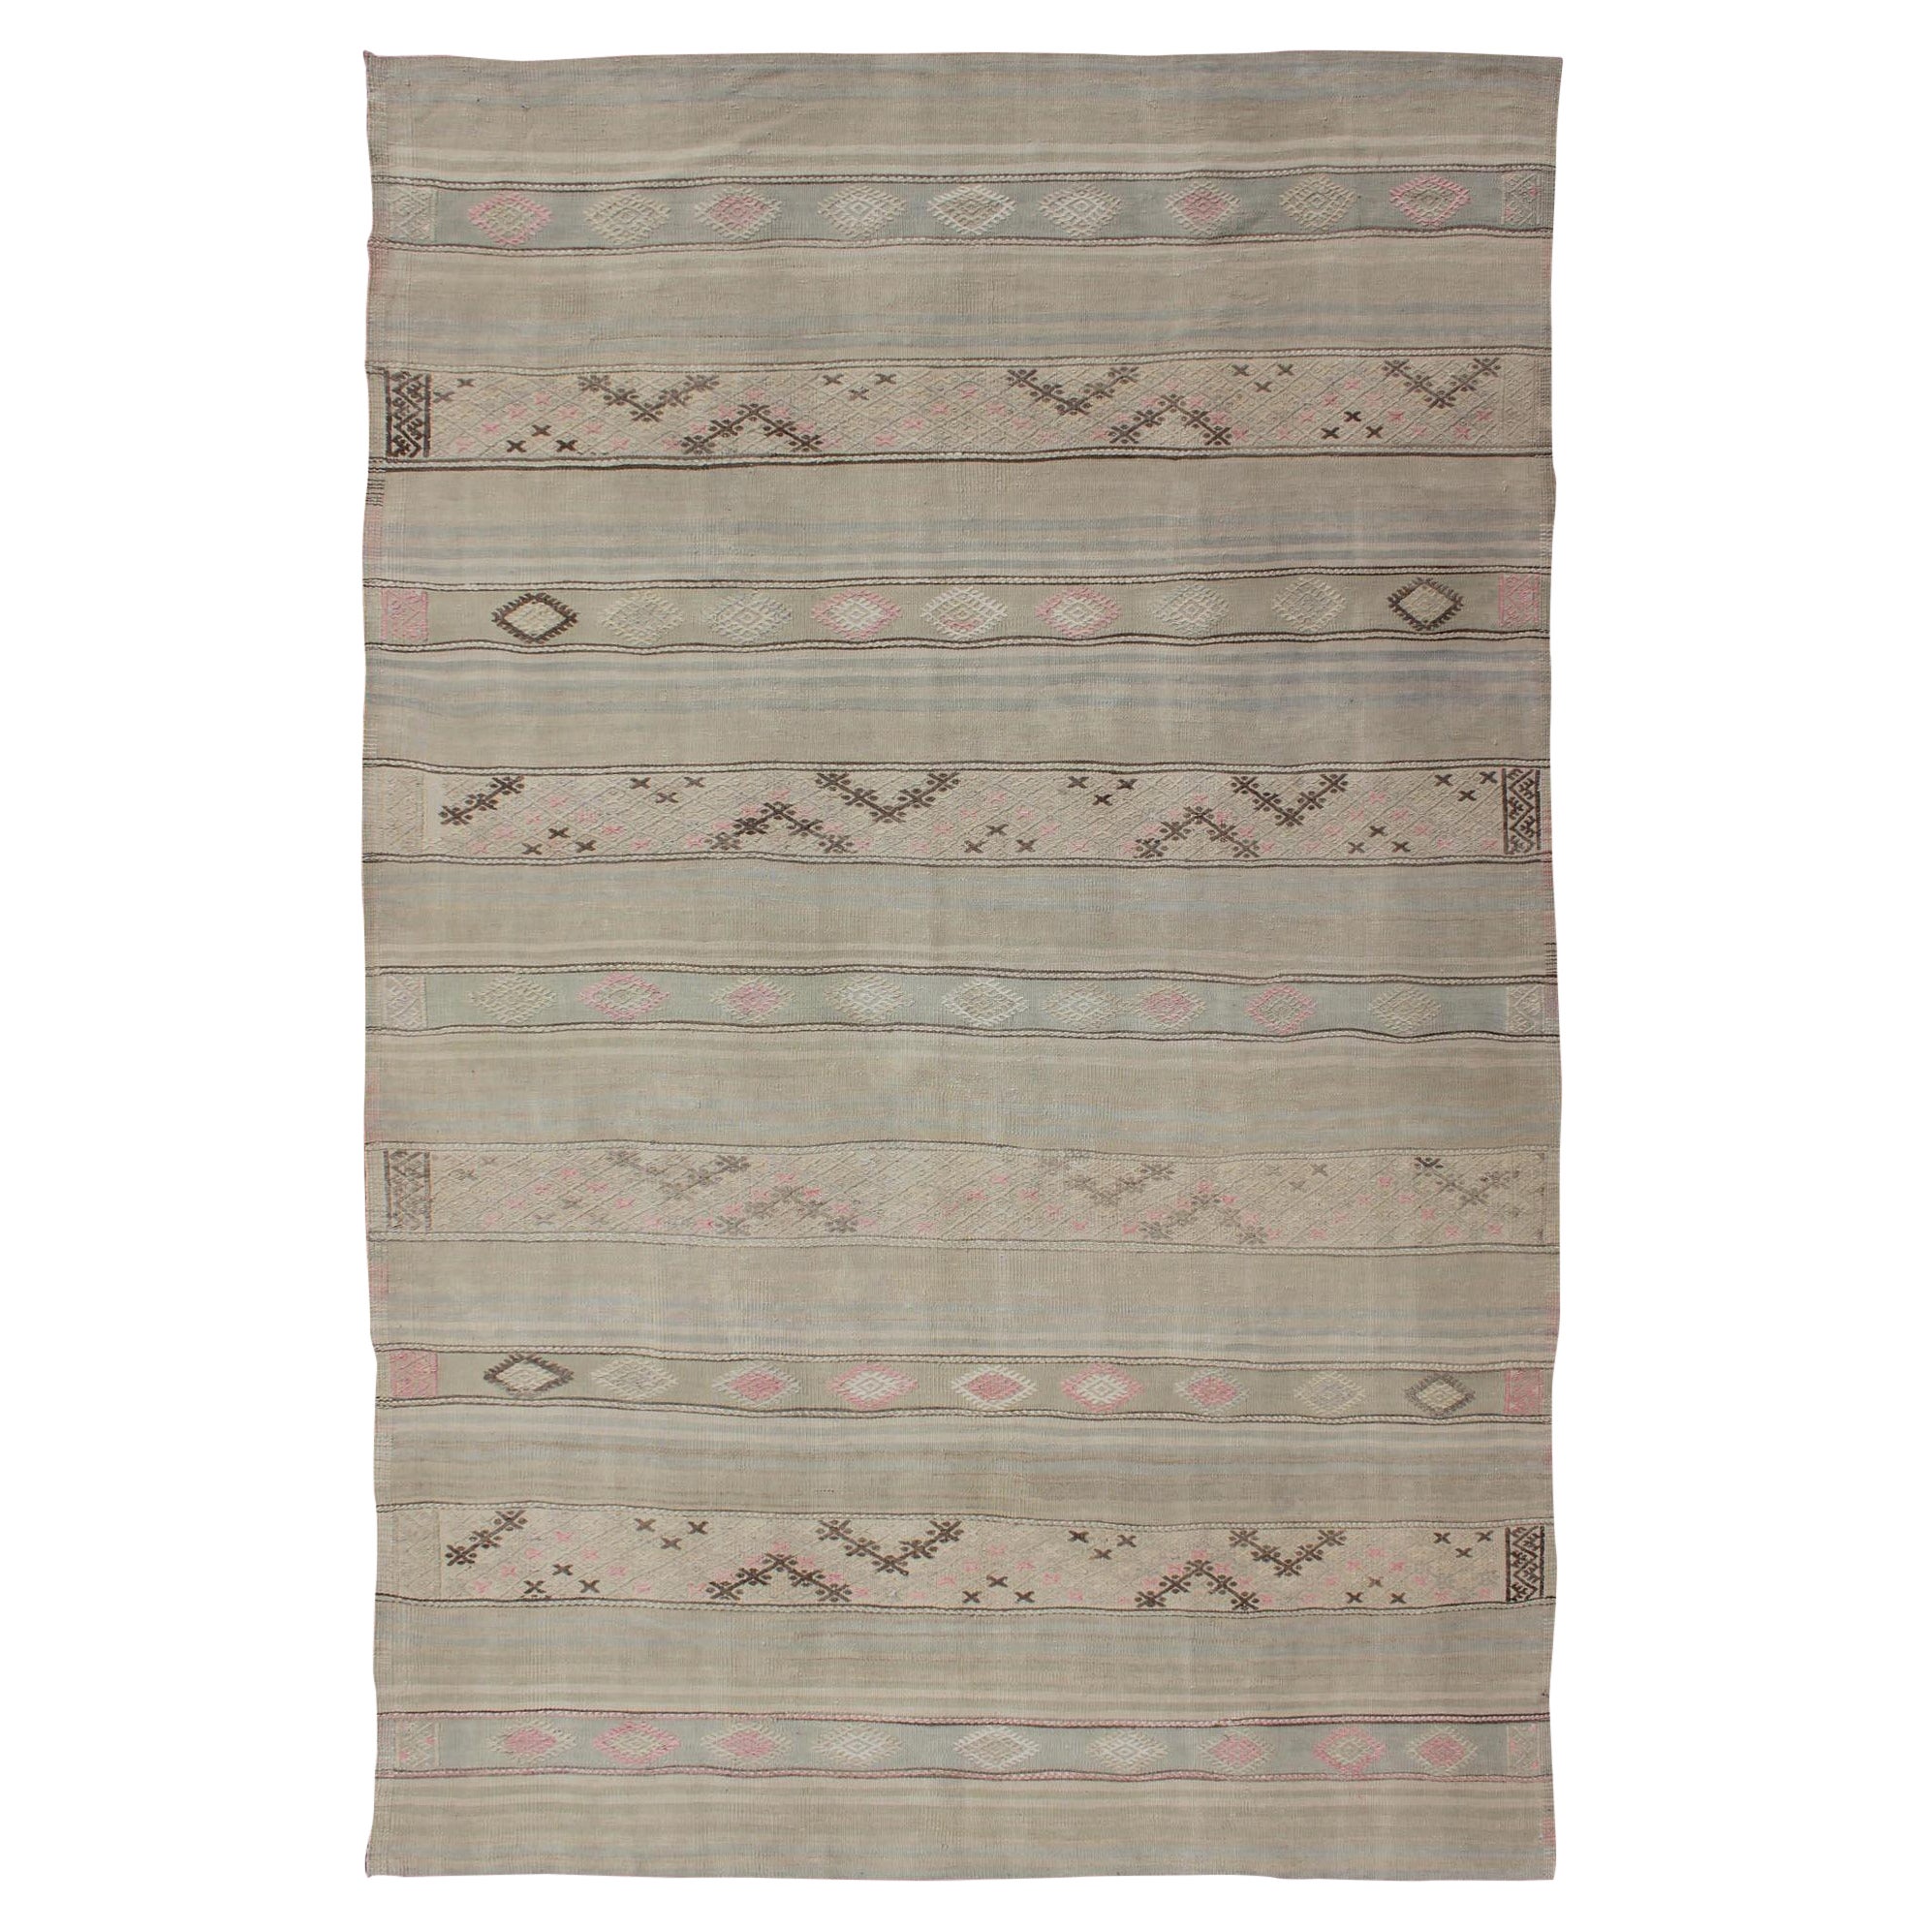 Vintage Turkish Flat-Weave Striped Kilim in Taupe, Pink, and Light Brown